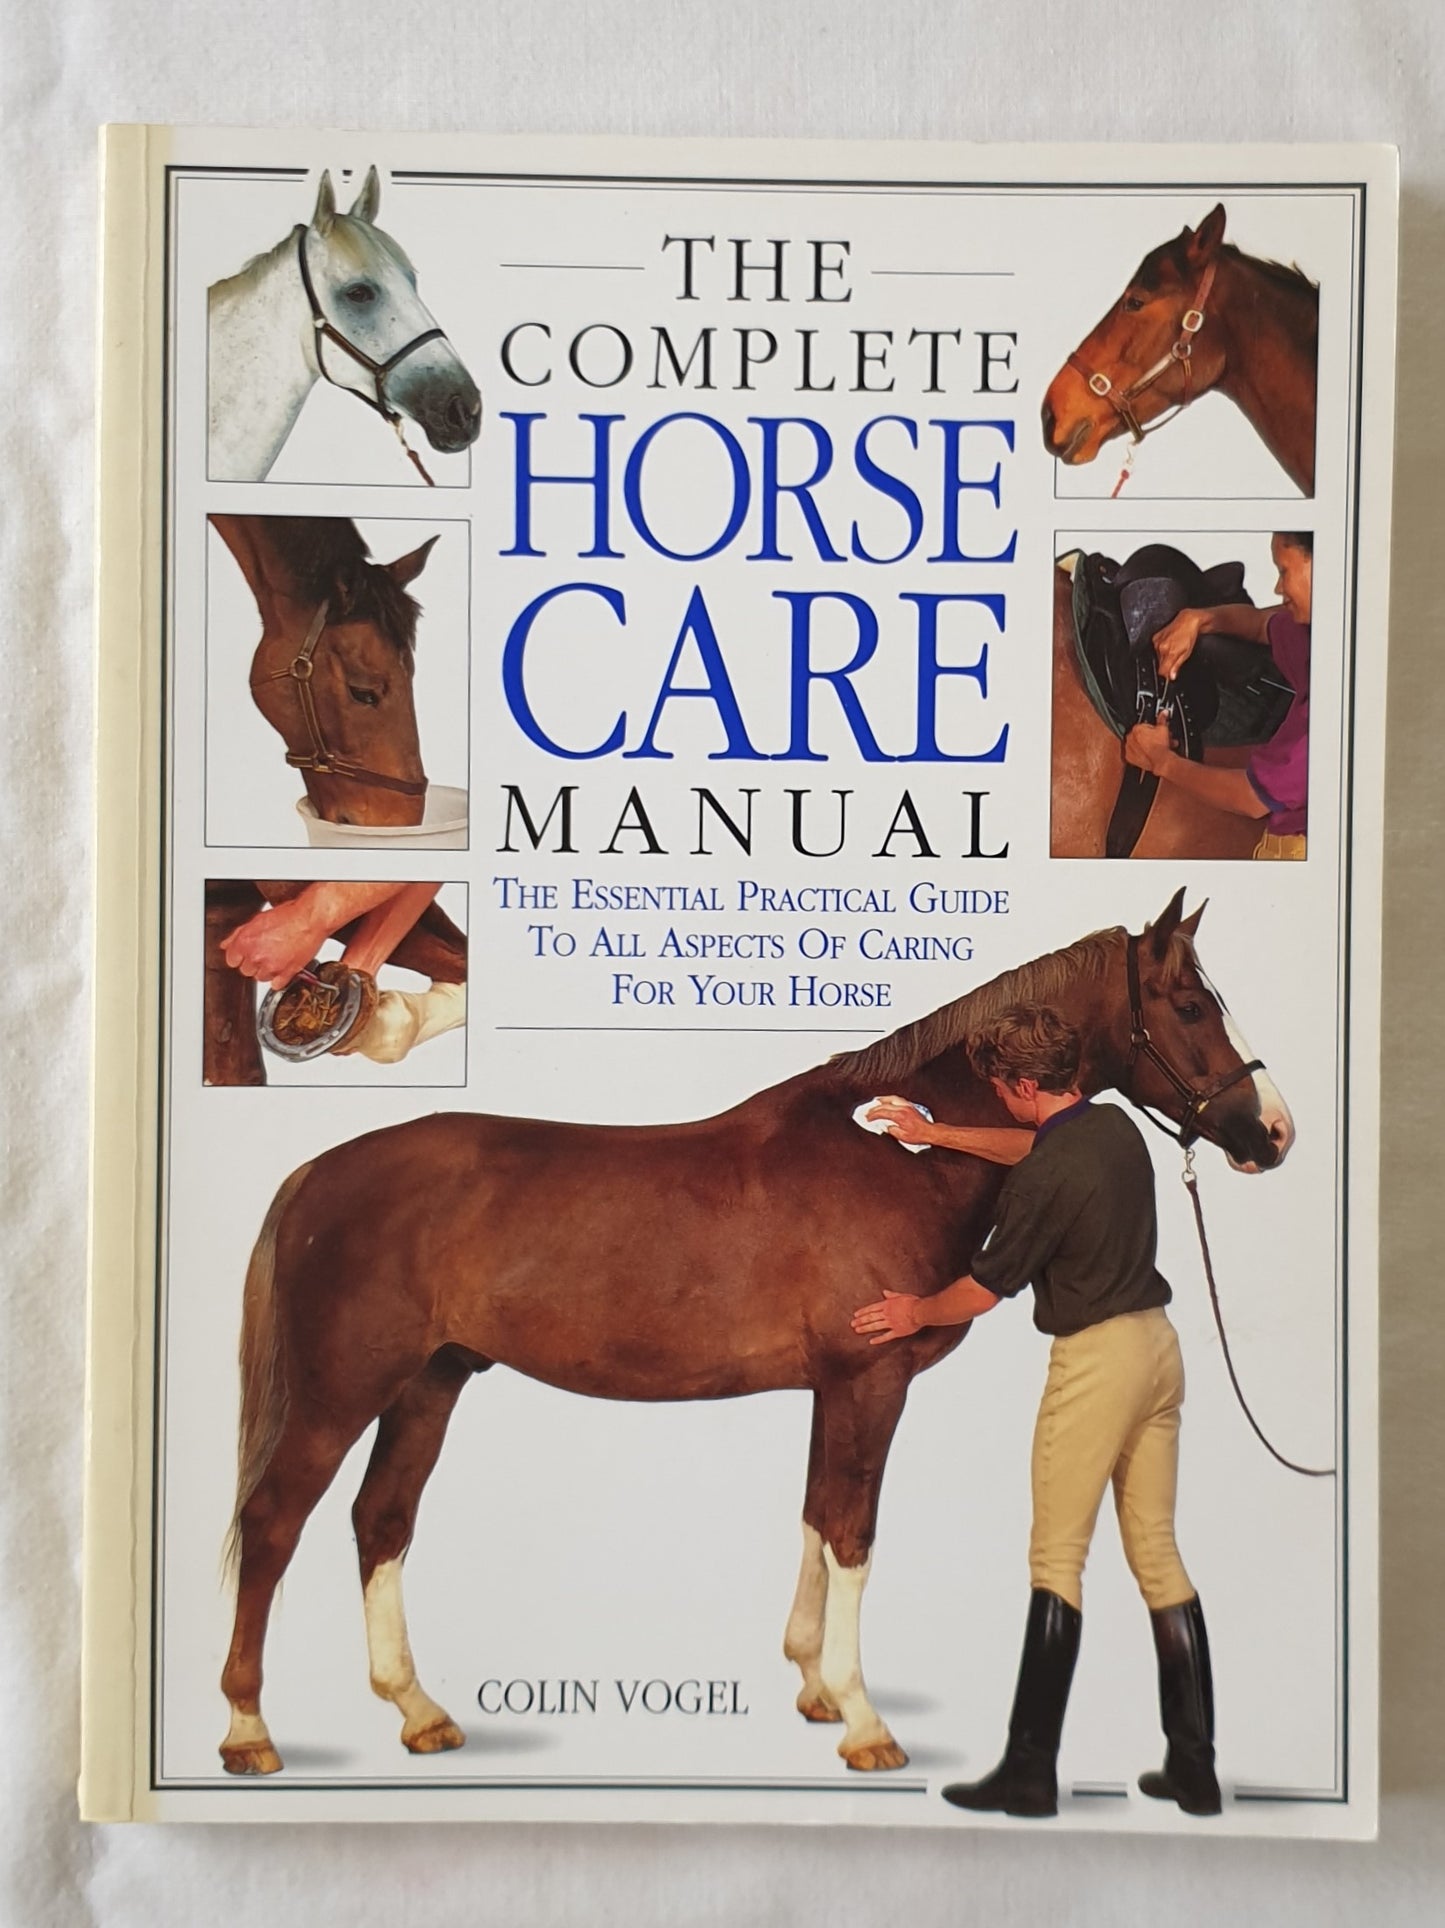 The Complete Horse Care Manual by Colin Vogel